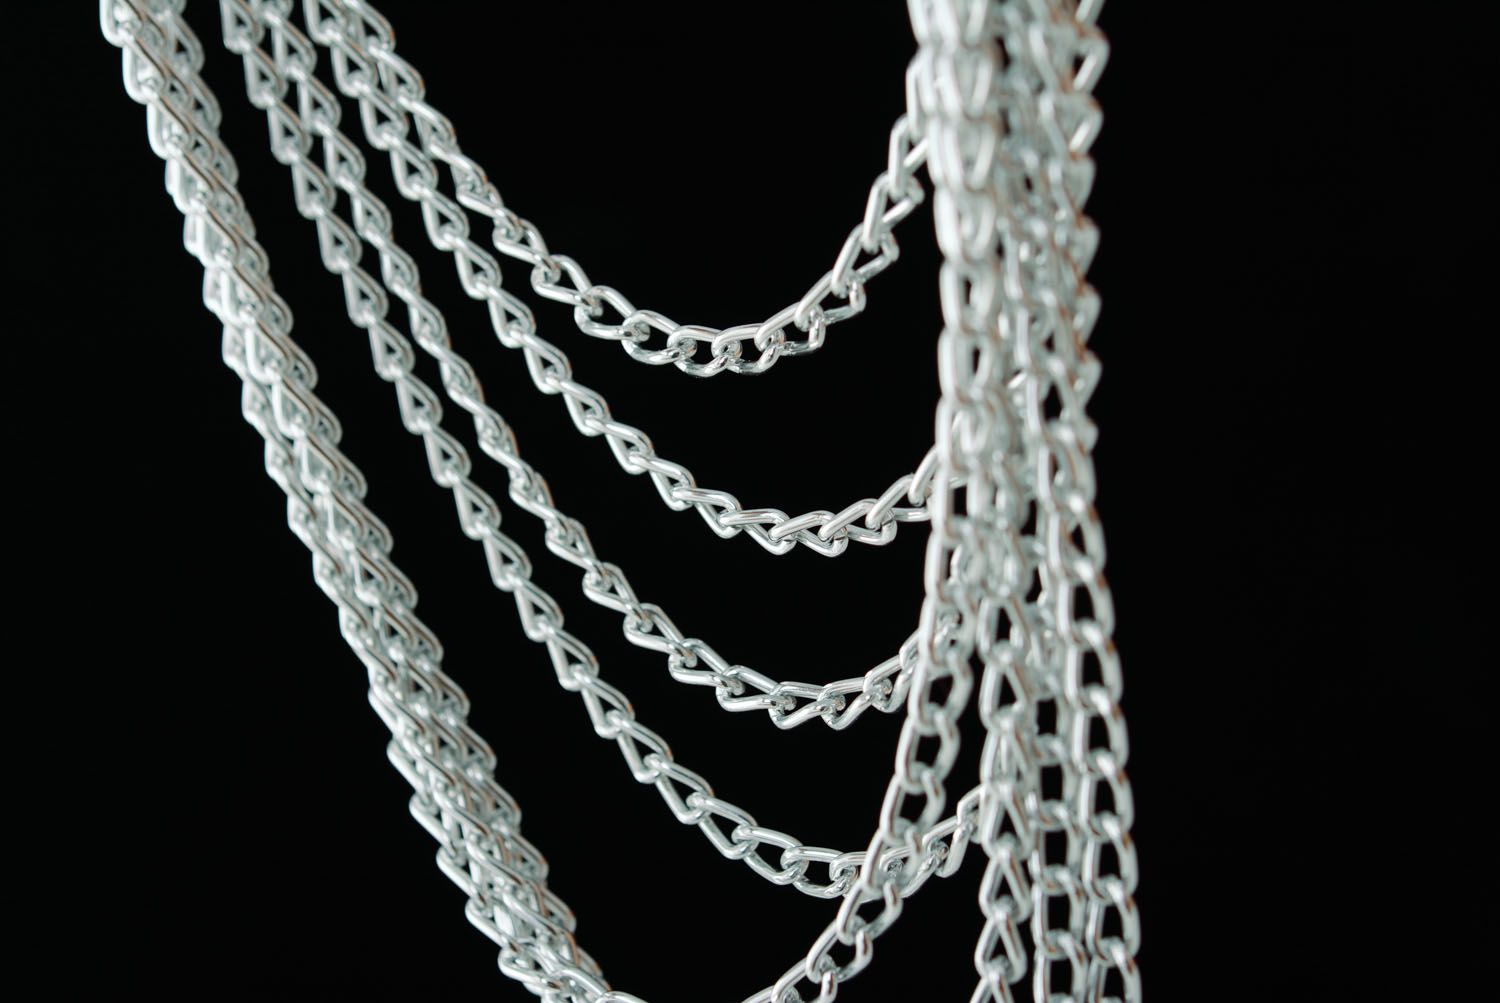 Women's necklace made of chains photo 2